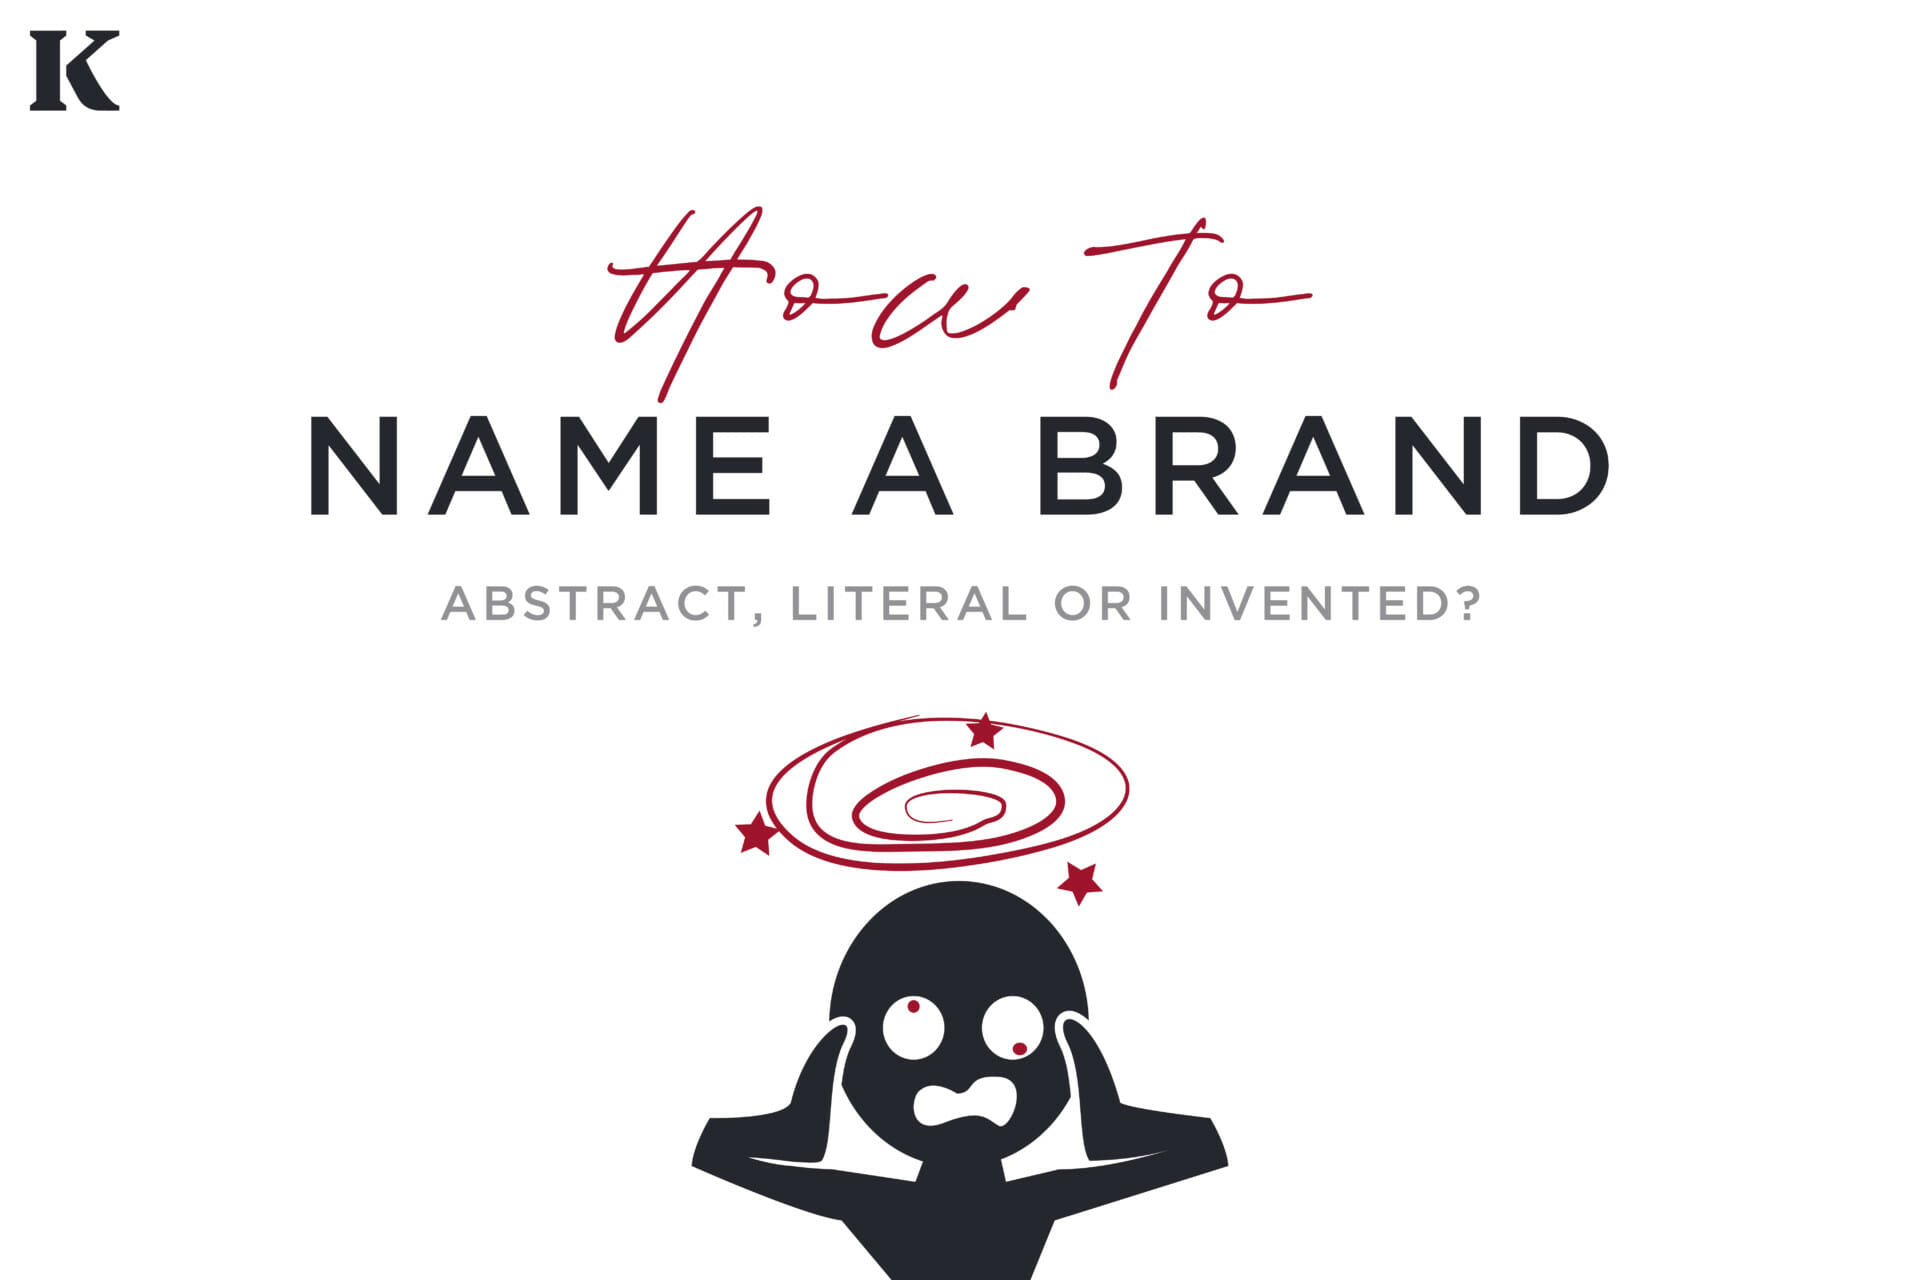 How to name a brand - brand naming importance